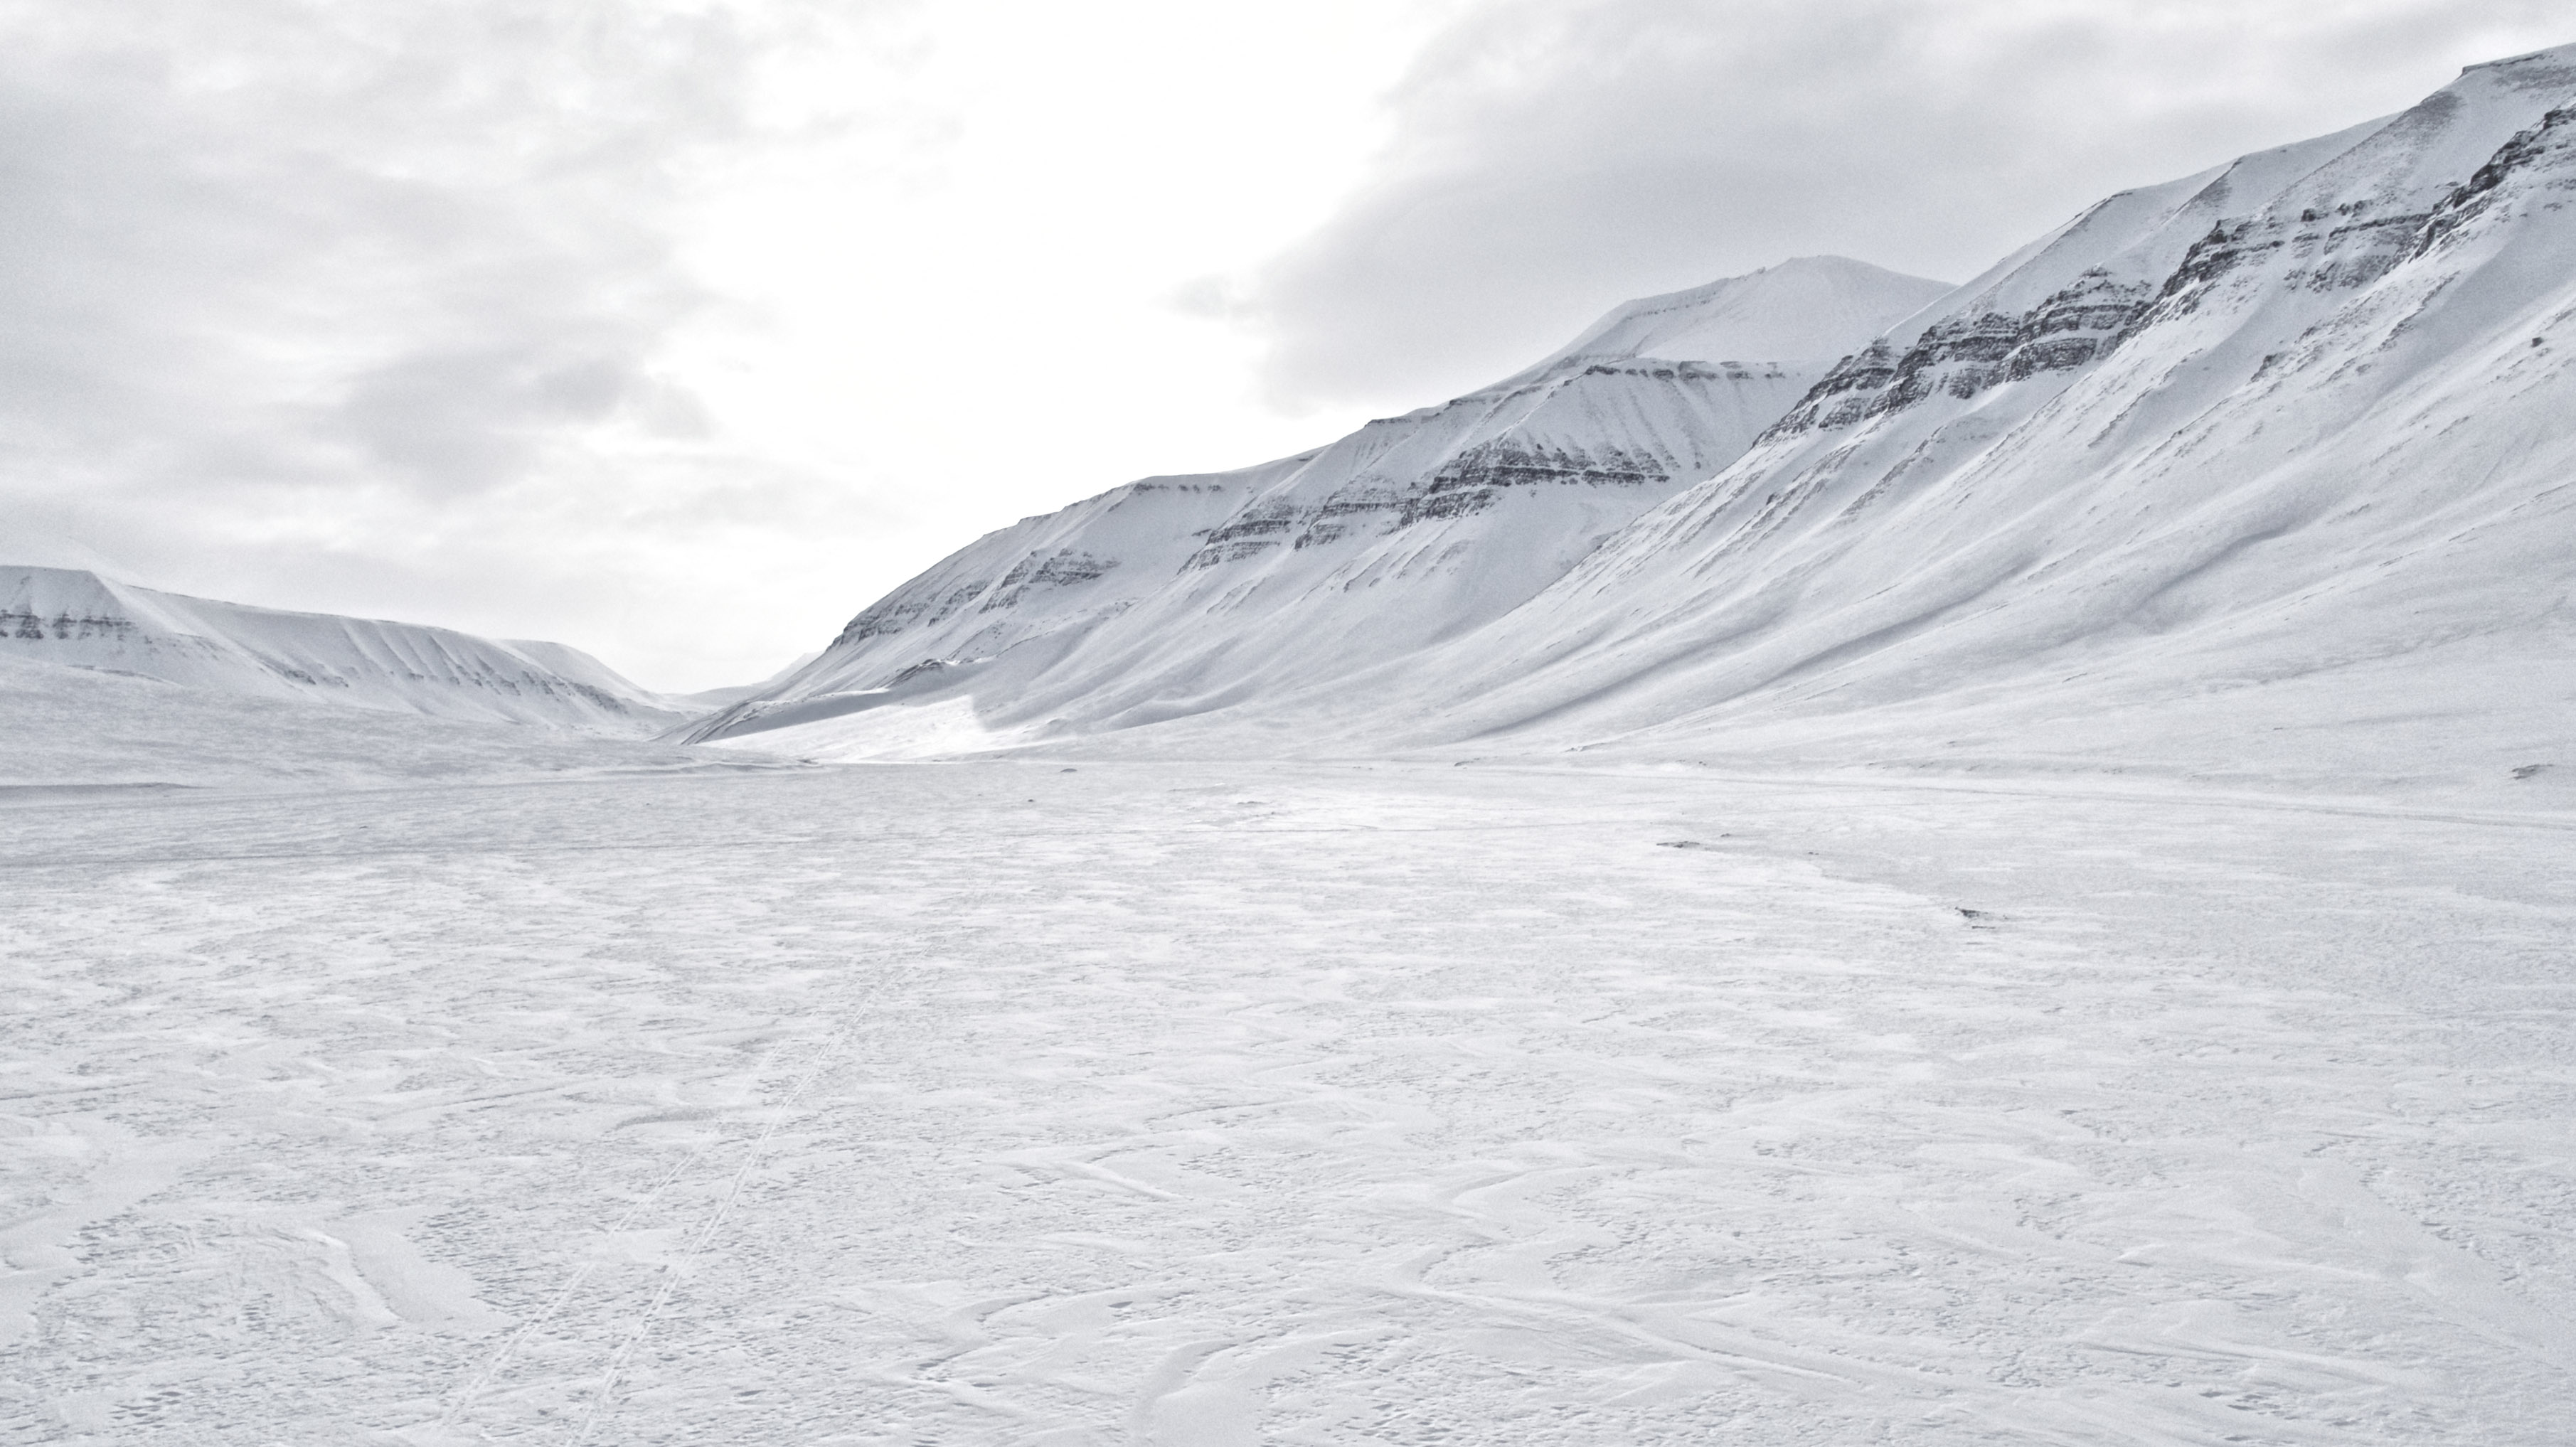 Icy and frozen Svalbard landscape